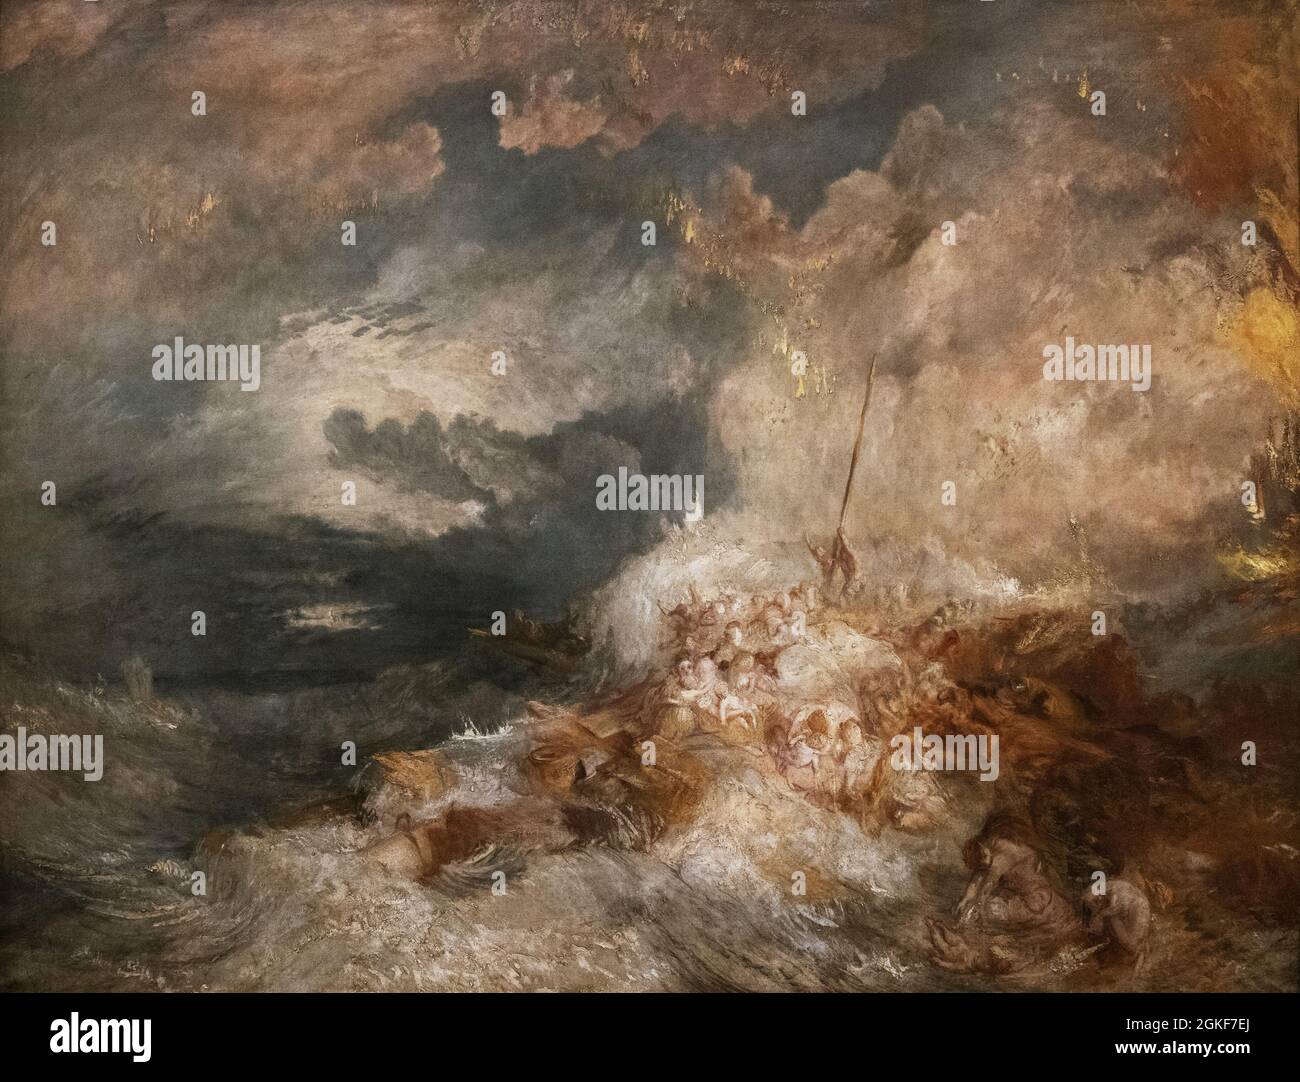 JMW Turner painting 'A Disaster at Sea' c. 1835 Oil on Canvas, possibly unfinished but may depict the wreck of the Amphitrite in 1833; Romantic era. Stock Photo